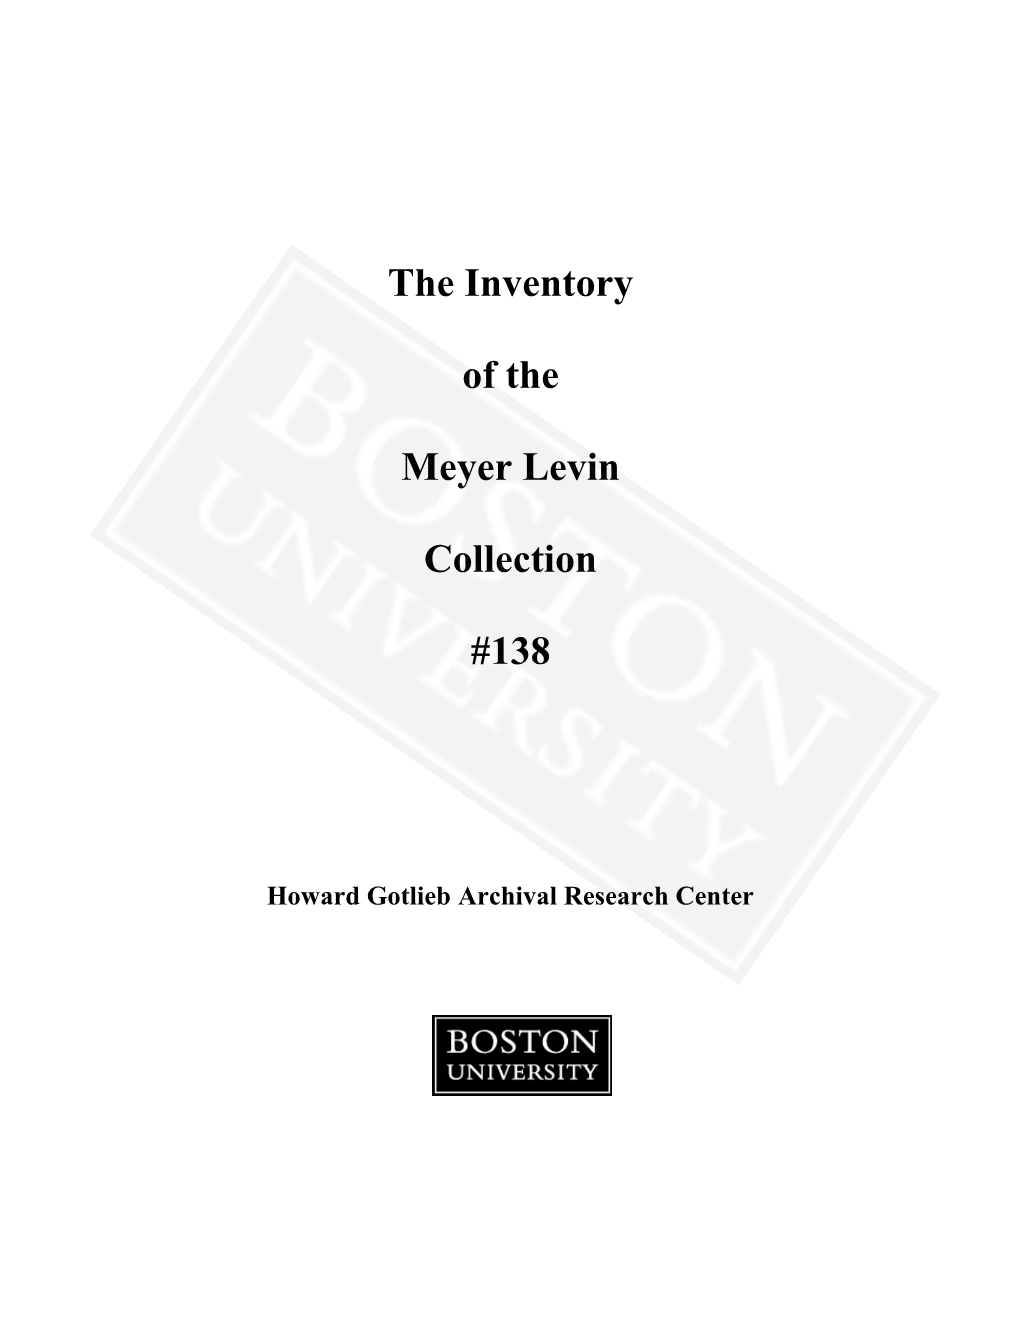 The Inventory of the Meyer Levin Collection #138